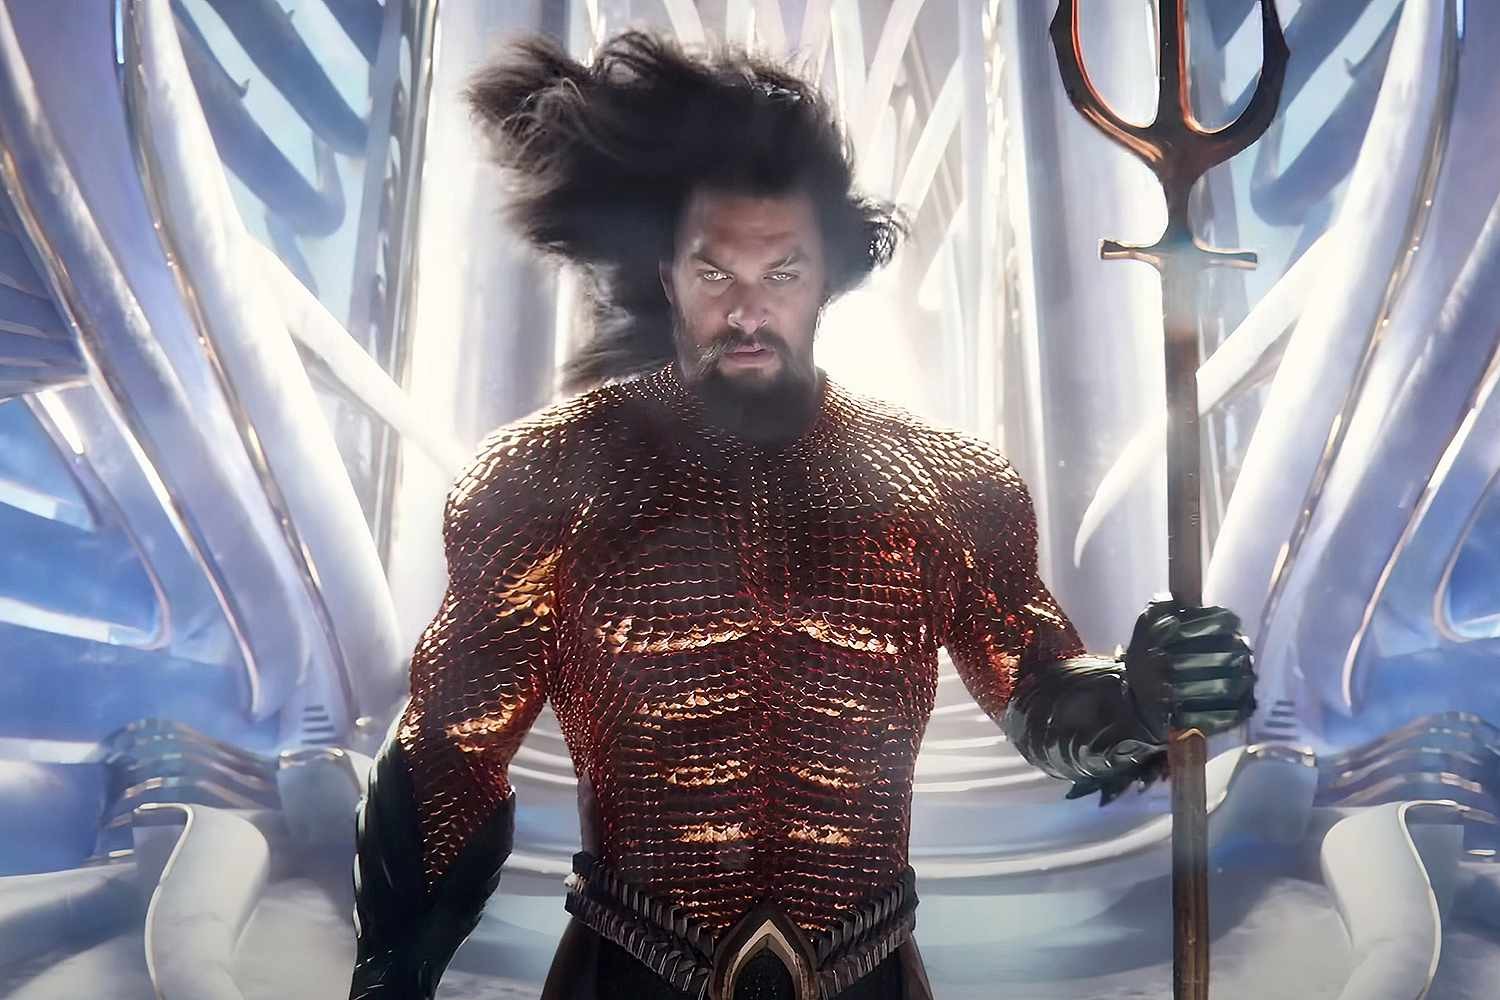 Aquaman 2 received a glowing score form Chinese audiences